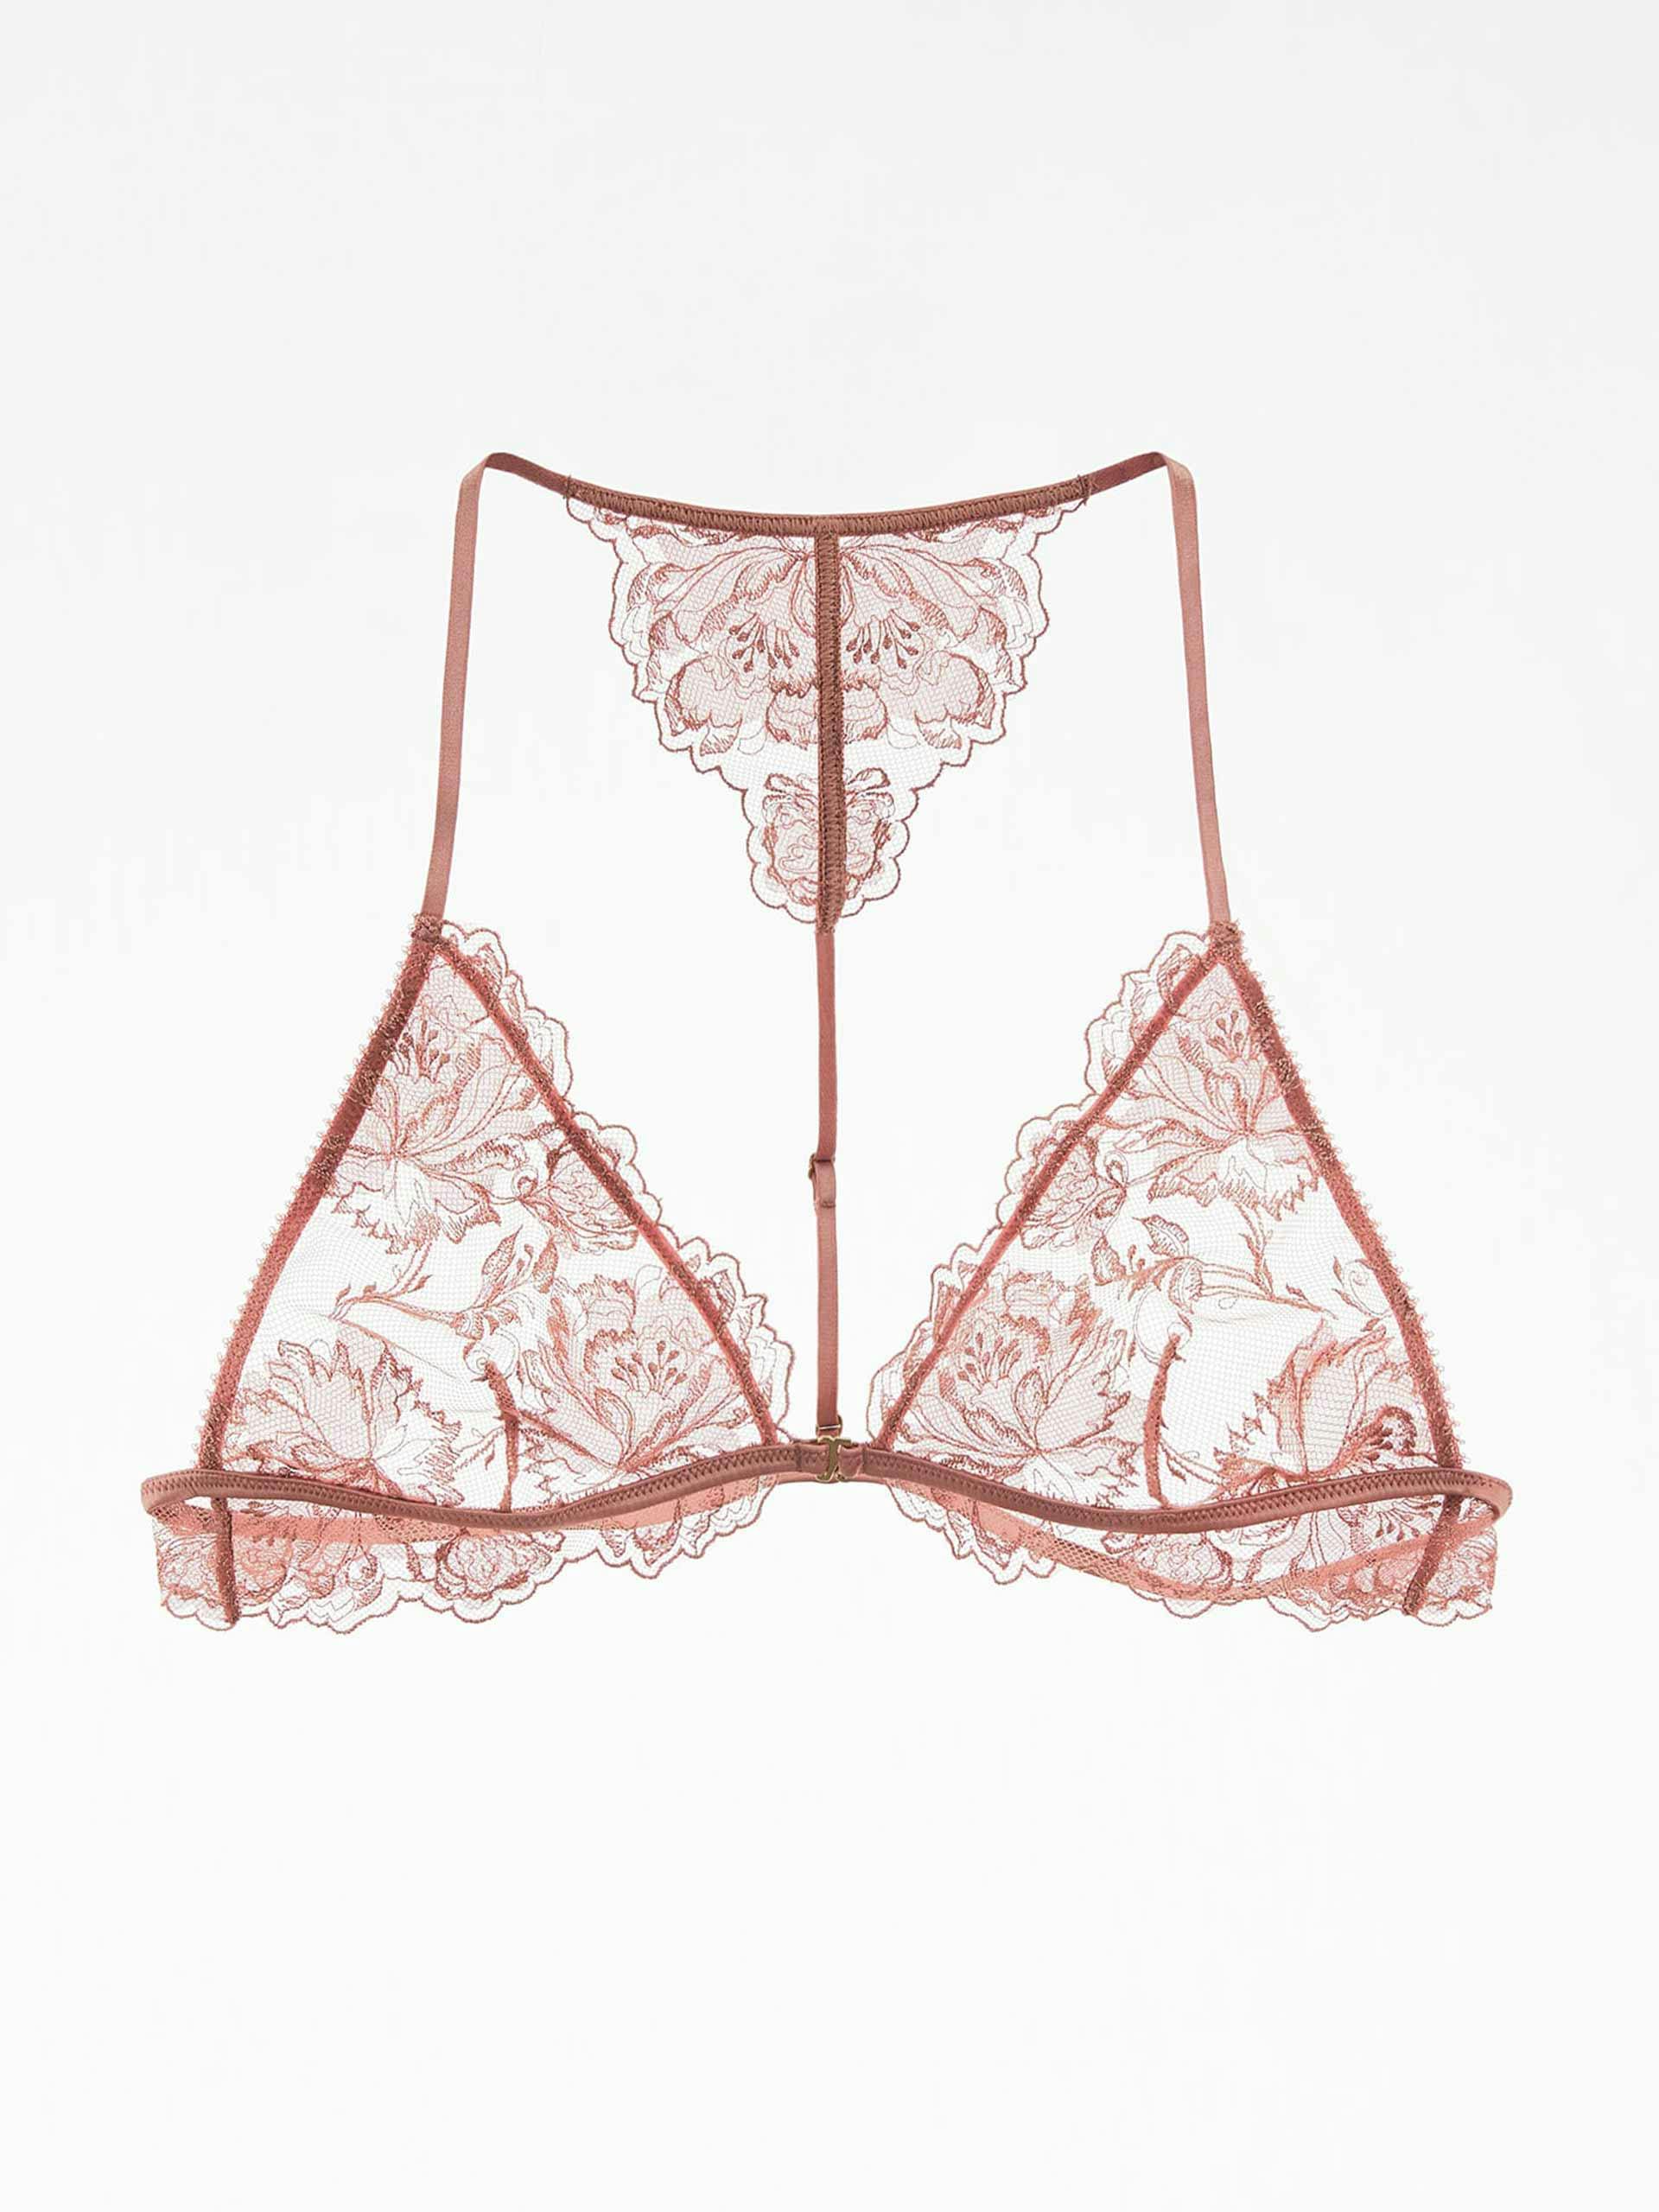 Triangular contrasting lace bralette